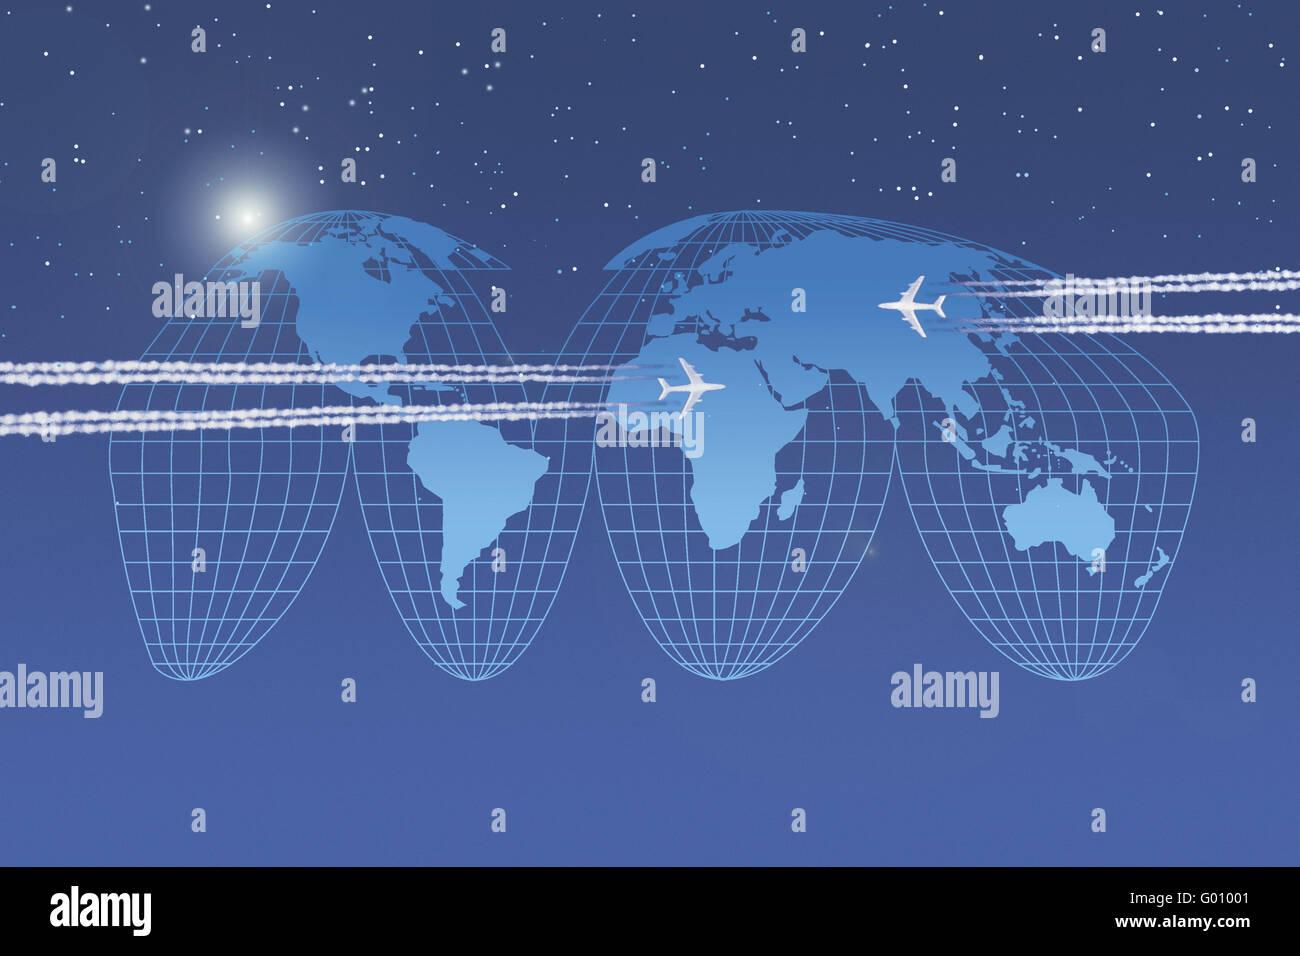 Two aircrafts in front of  a world map in Goode-Projection Stock Photo